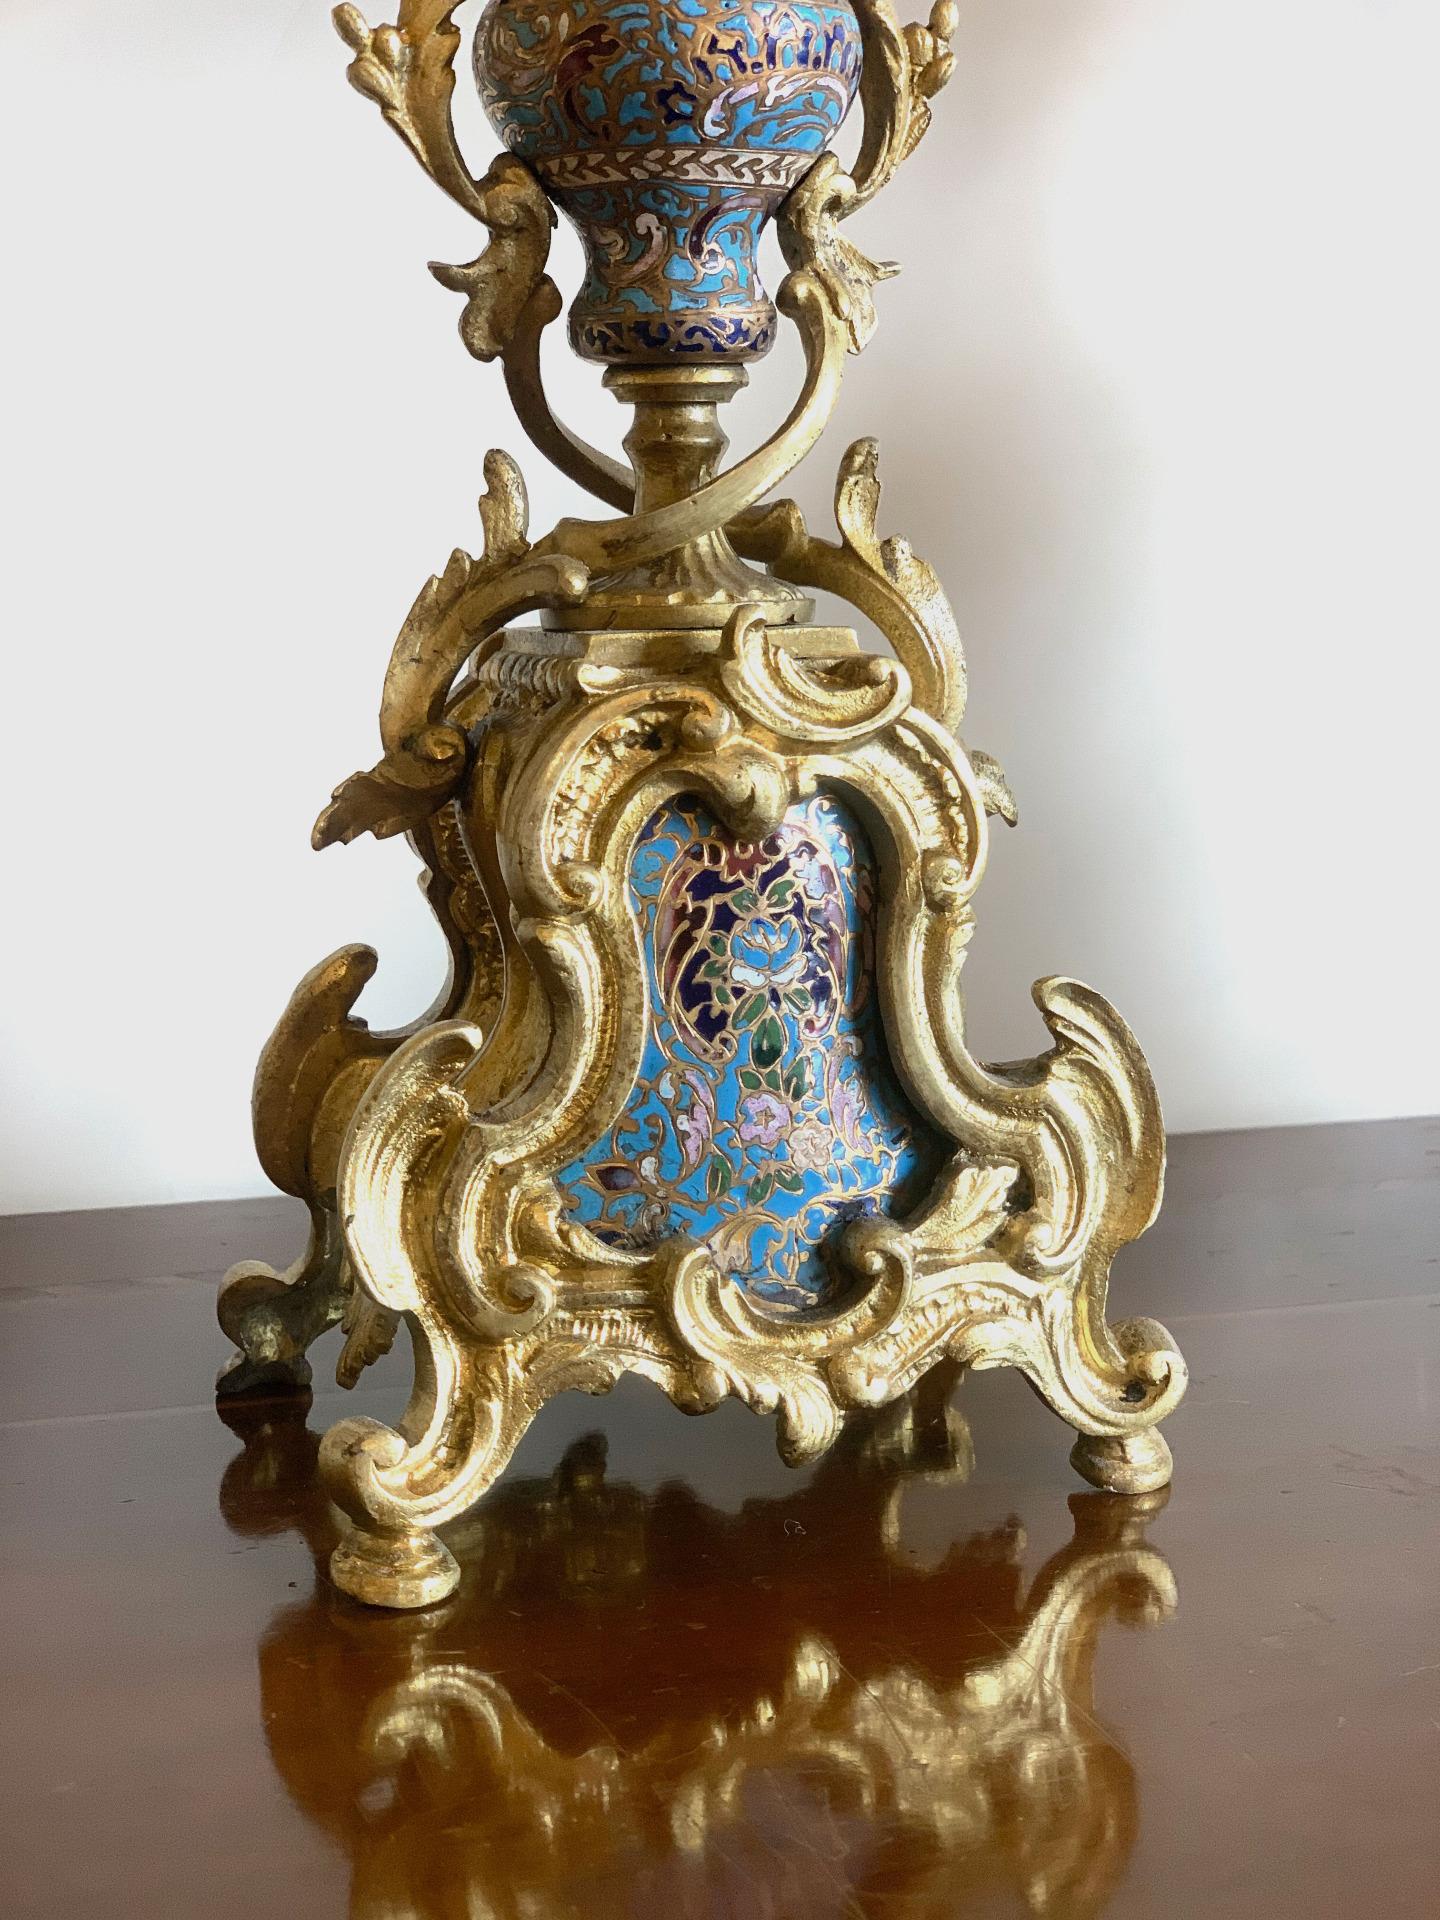 Elegant pair of gilded bronze candlesticks with leaf-like shapes and glassonnè enamel inserts. Typical French manufacture from the mid-1800s. The material used was produced in the East to complete objects with a clear European taste. The